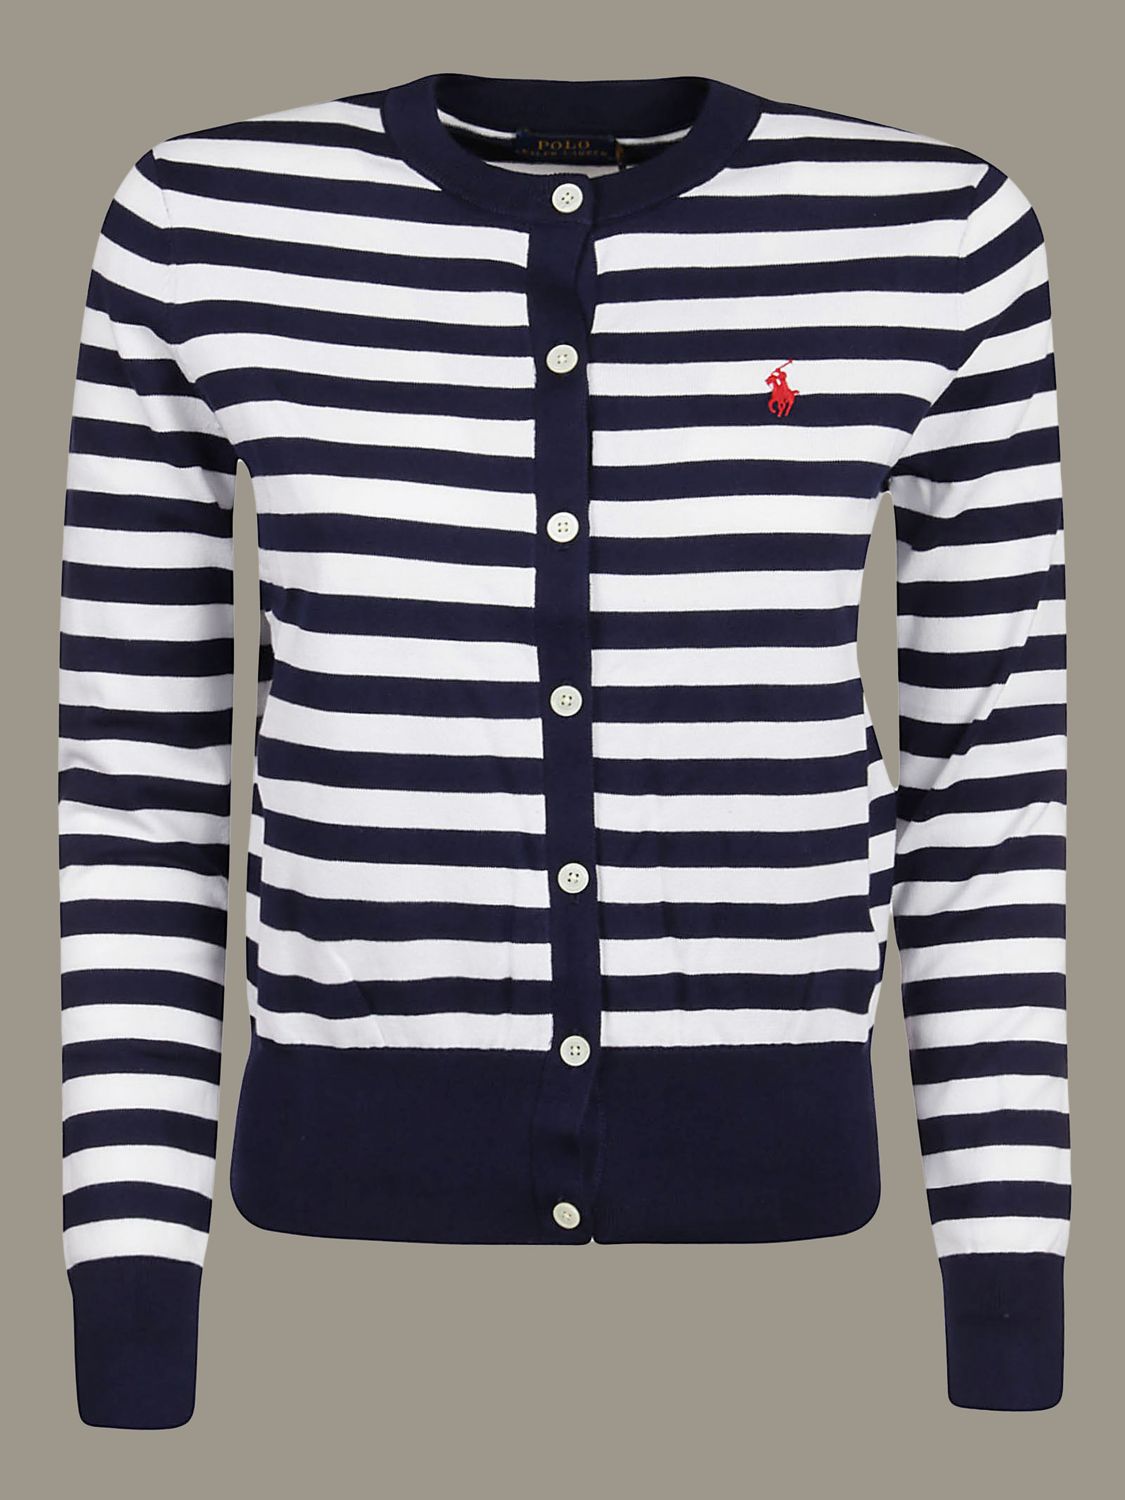 Polo Ralph Lauren Outlet: sweater for woman - Navy | Polo Ralph Lauren  sweater 211780396 online on 